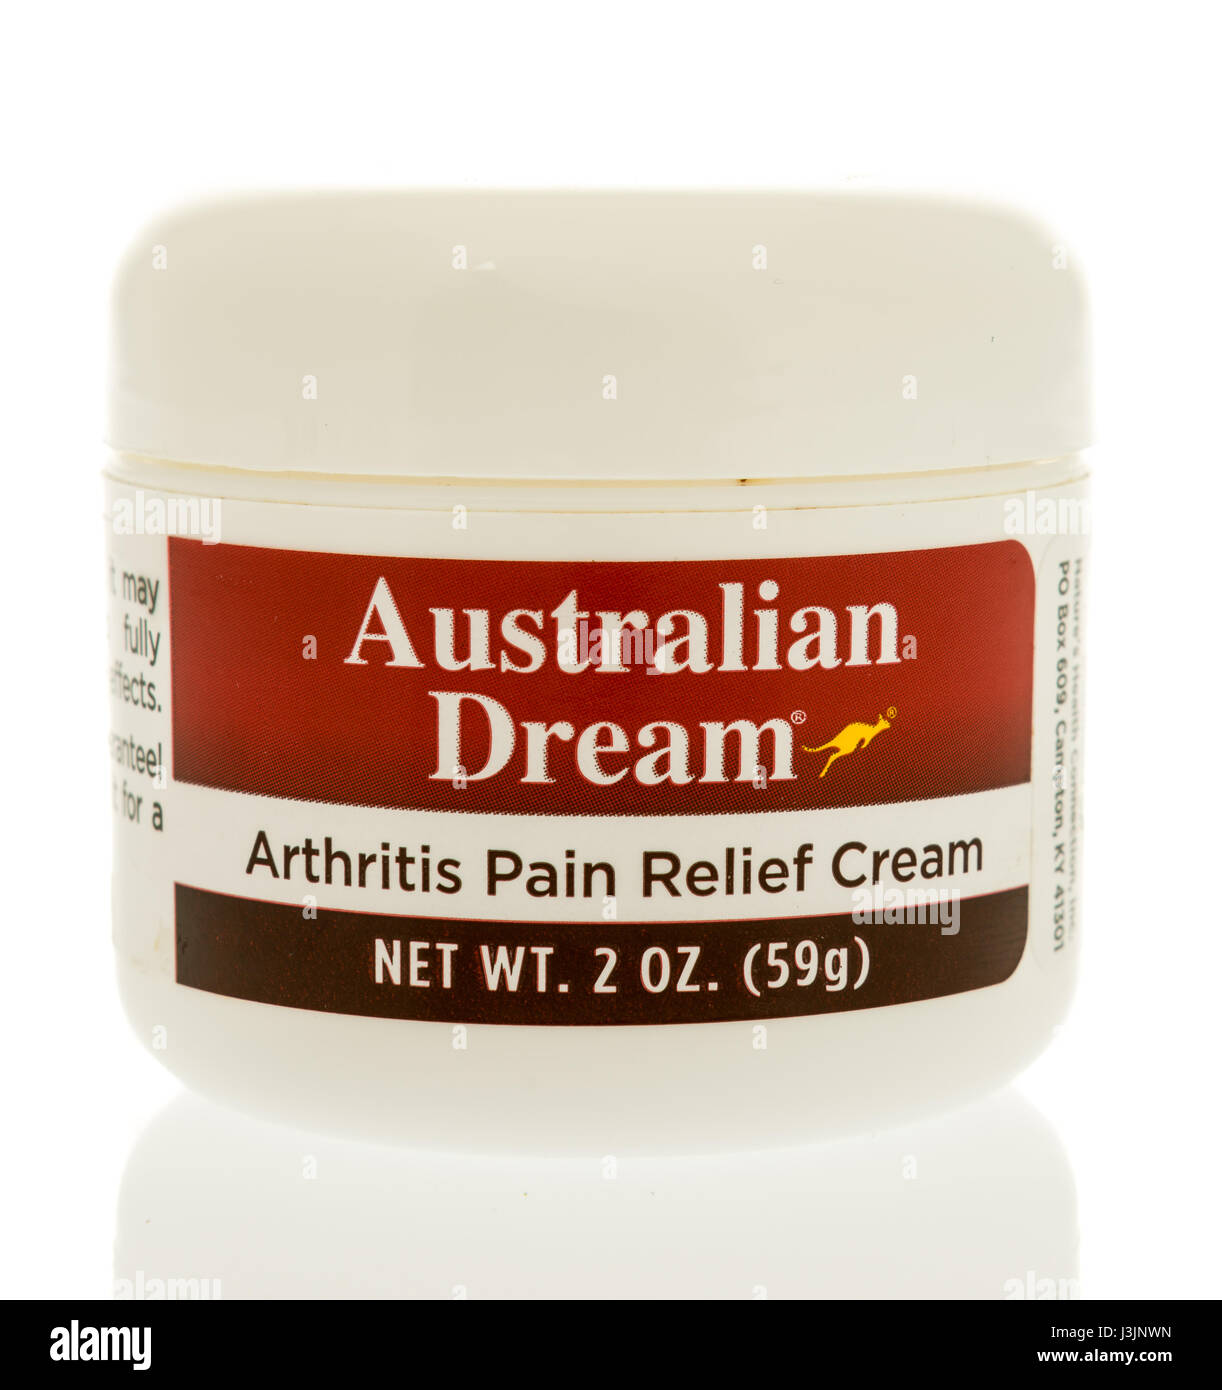 Winneconne, WI - 28 April 2017: A container of Australian Dream arthritis pain relief cream on an isolated background. Stock Photo